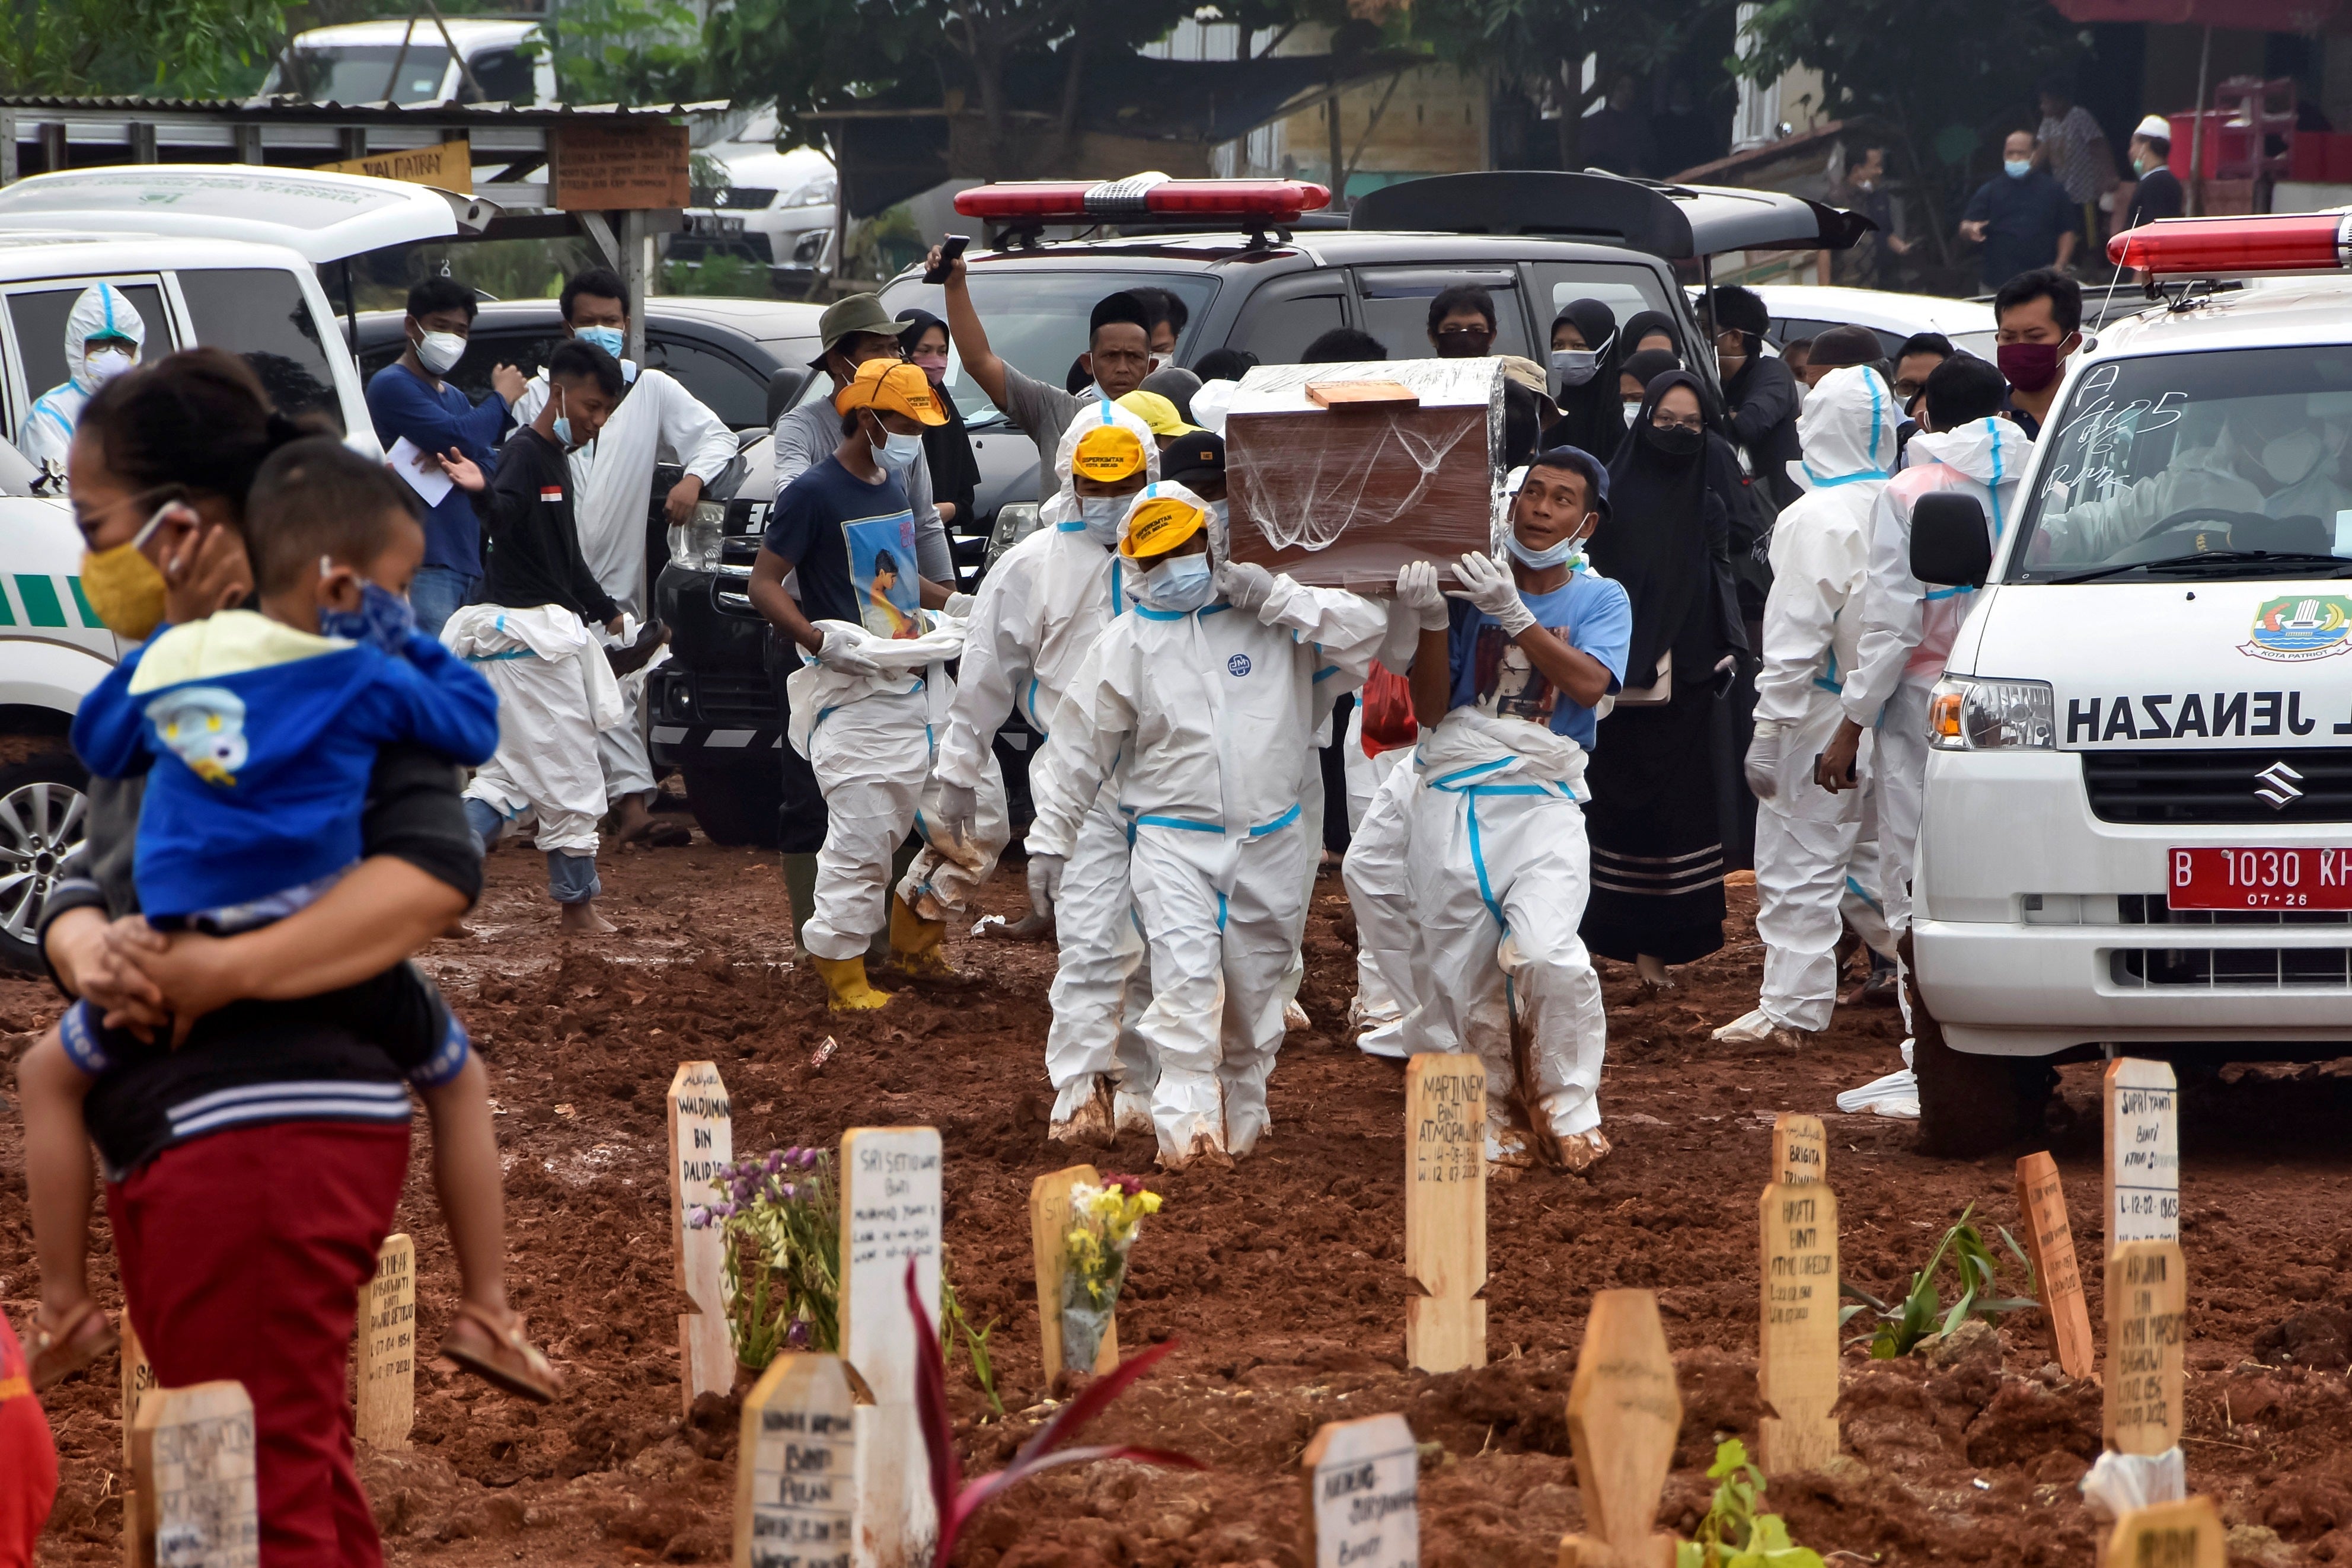 Funeral workers prepare to bury deceased Covid-19 coronavirus victims who were brought by ambulance directly from hospitals, at the Pedurenan public cemetery in Bekasi, West Java on 23 July 2021